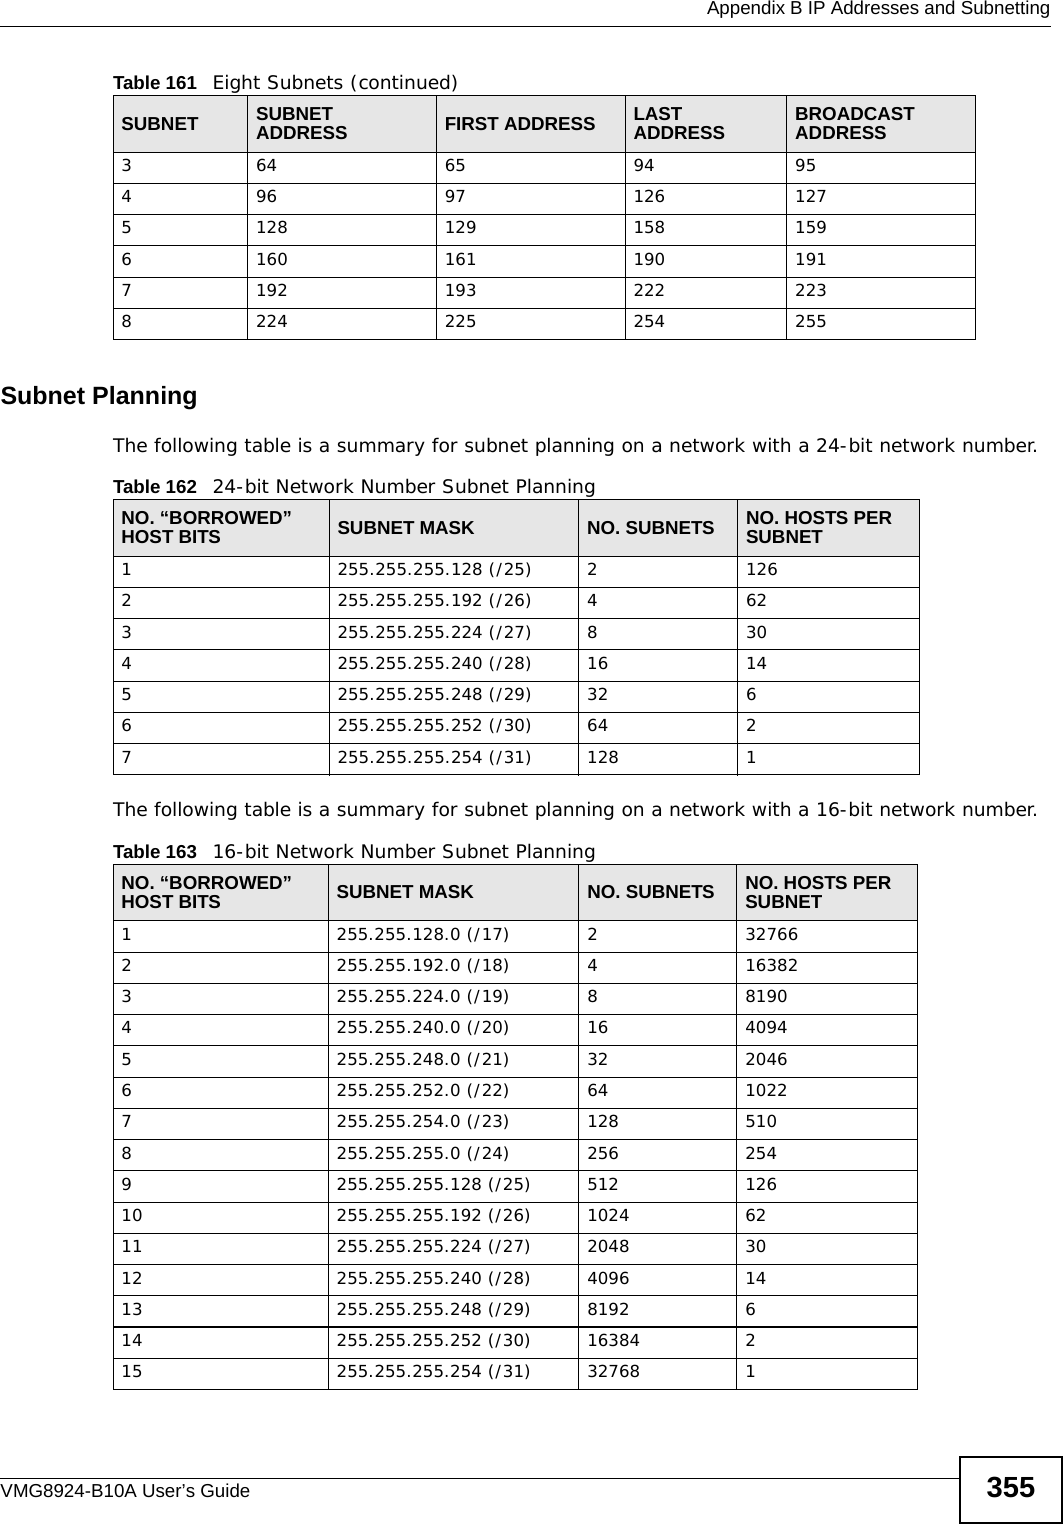  Appendix B IP Addresses and SubnettingVMG8924-B10A User’s Guide 355Subnet PlanningThe following table is a summary for subnet planning on a network with a 24-bit network number.The following table is a summary for subnet planning on a network with a 16-bit network number. 364 65 94 95496 97 126 1275128 129 158 1596160 161 190 1917192 193 222 2238224 225 254 255Table 161   Eight Subnets (continued)SUBNET SUBNET ADDRESS FIRST ADDRESS LAST ADDRESS BROADCAST ADDRESSTable 162   24-bit Network Number Subnet PlanningNO. “BORROWED” HOST BITS SUBNET MASK NO. SUBNETS NO. HOSTS PER SUBNET1255.255.255.128 (/25) 21262255.255.255.192 (/26) 4623255.255.255.224 (/27) 8304255.255.255.240 (/28) 16 145255.255.255.248 (/29) 32 66255.255.255.252 (/30) 64 27255.255.255.254 (/31) 128 1Table 163   16-bit Network Number Subnet PlanningNO. “BORROWED” HOST BITS SUBNET MASK NO. SUBNETS NO. HOSTS PER SUBNET1255.255.128.0 (/17) 2327662255.255.192.0 (/18) 4163823255.255.224.0 (/19) 881904255.255.240.0 (/20) 16 40945255.255.248.0 (/21) 32 20466255.255.252.0 (/22) 64 10227255.255.254.0 (/23) 128 5108255.255.255.0 (/24) 256 2549255.255.255.128 (/25) 512 12610 255.255.255.192 (/26) 1024 6211 255.255.255.224 (/27) 2048 3012 255.255.255.240 (/28) 4096 1413 255.255.255.248 (/29) 8192 614 255.255.255.252 (/30) 16384 215 255.255.255.254 (/31) 32768 1